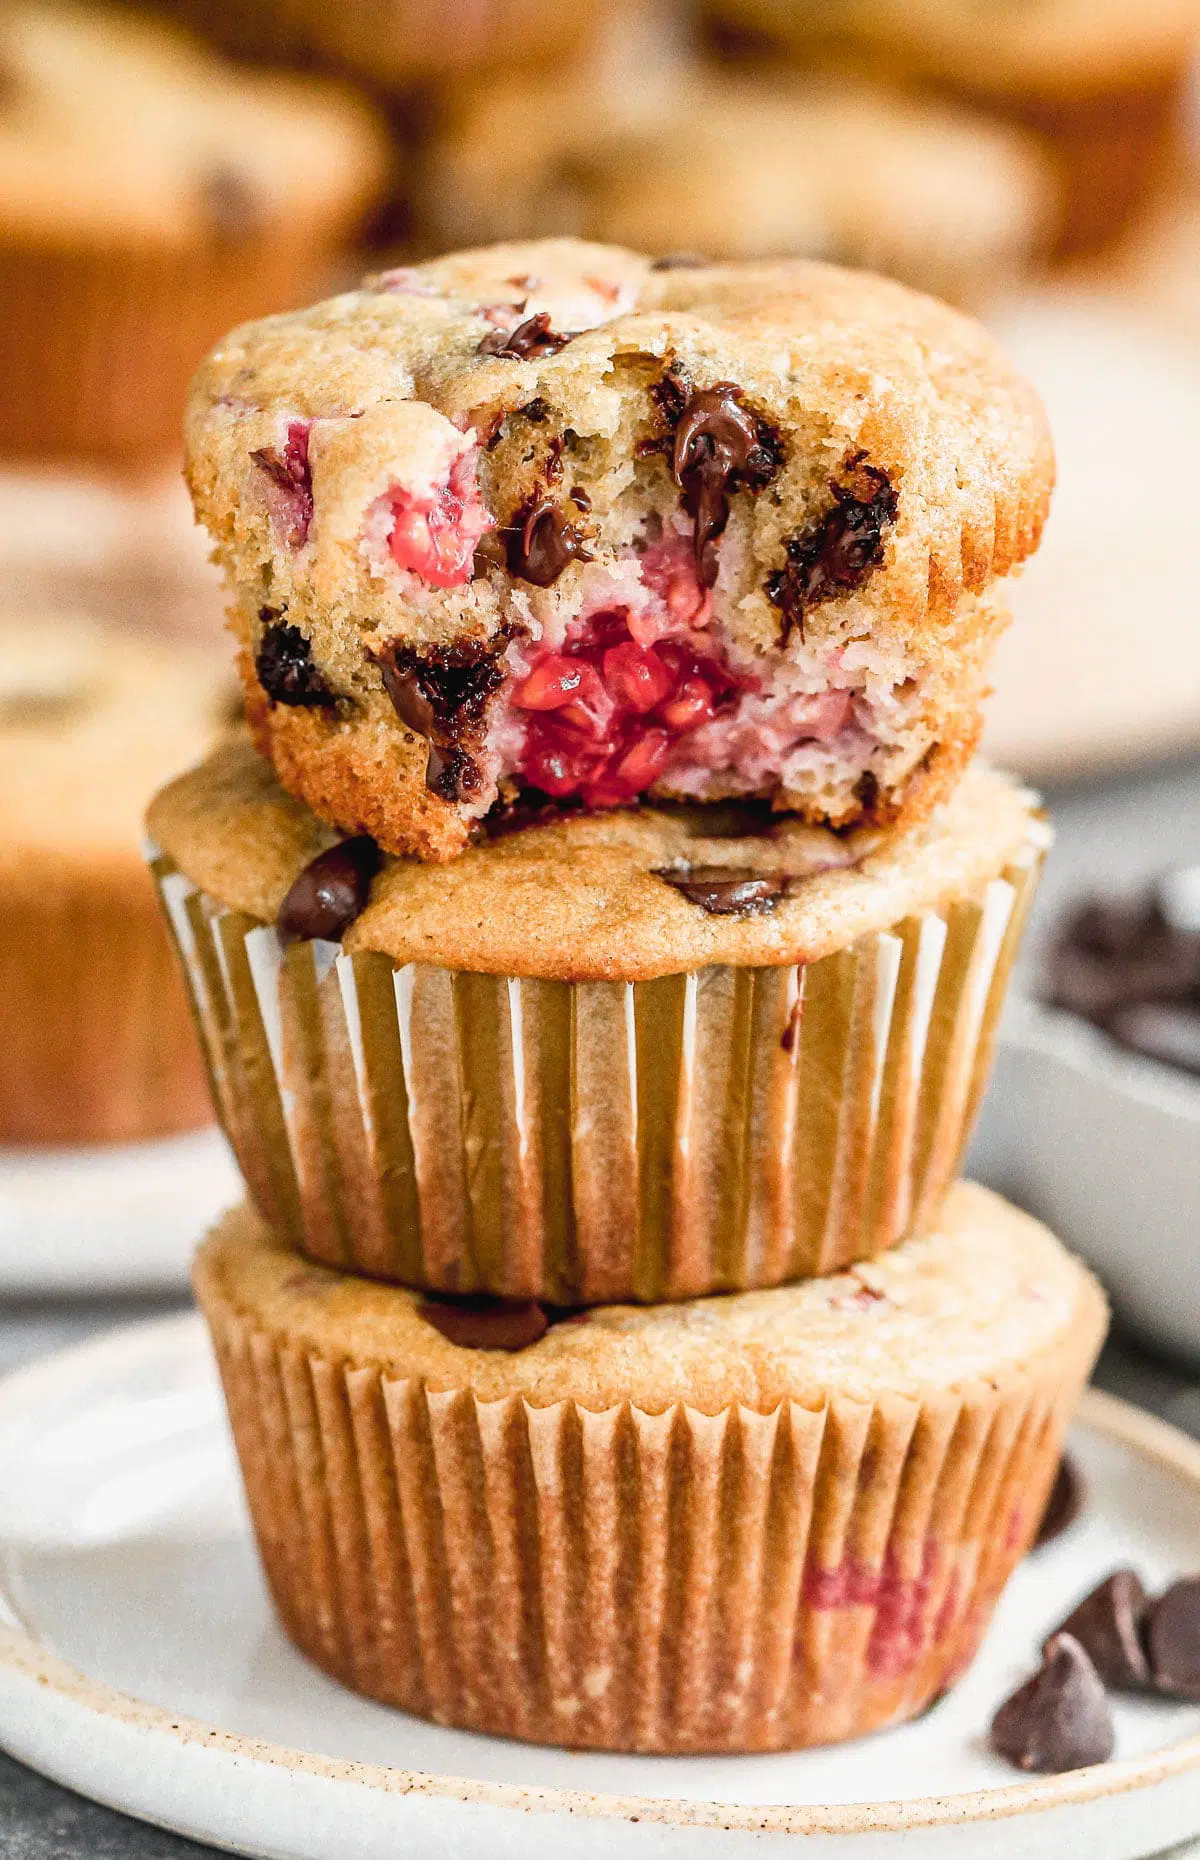 These one bowl Chocolate Raspberry Muffins are light, fluffy and full of gooey chocolate raspberry flavor. Made with protein-packed Greek yogurt, coconut oil and whole-wheat flour, they also have a good dose of healthiness so you don't have to feel completely guilty indulging. &nbsp;Perfect way to kickstart your day or nestle in a sweet pick-me-up in the afternoon.&nbsp;